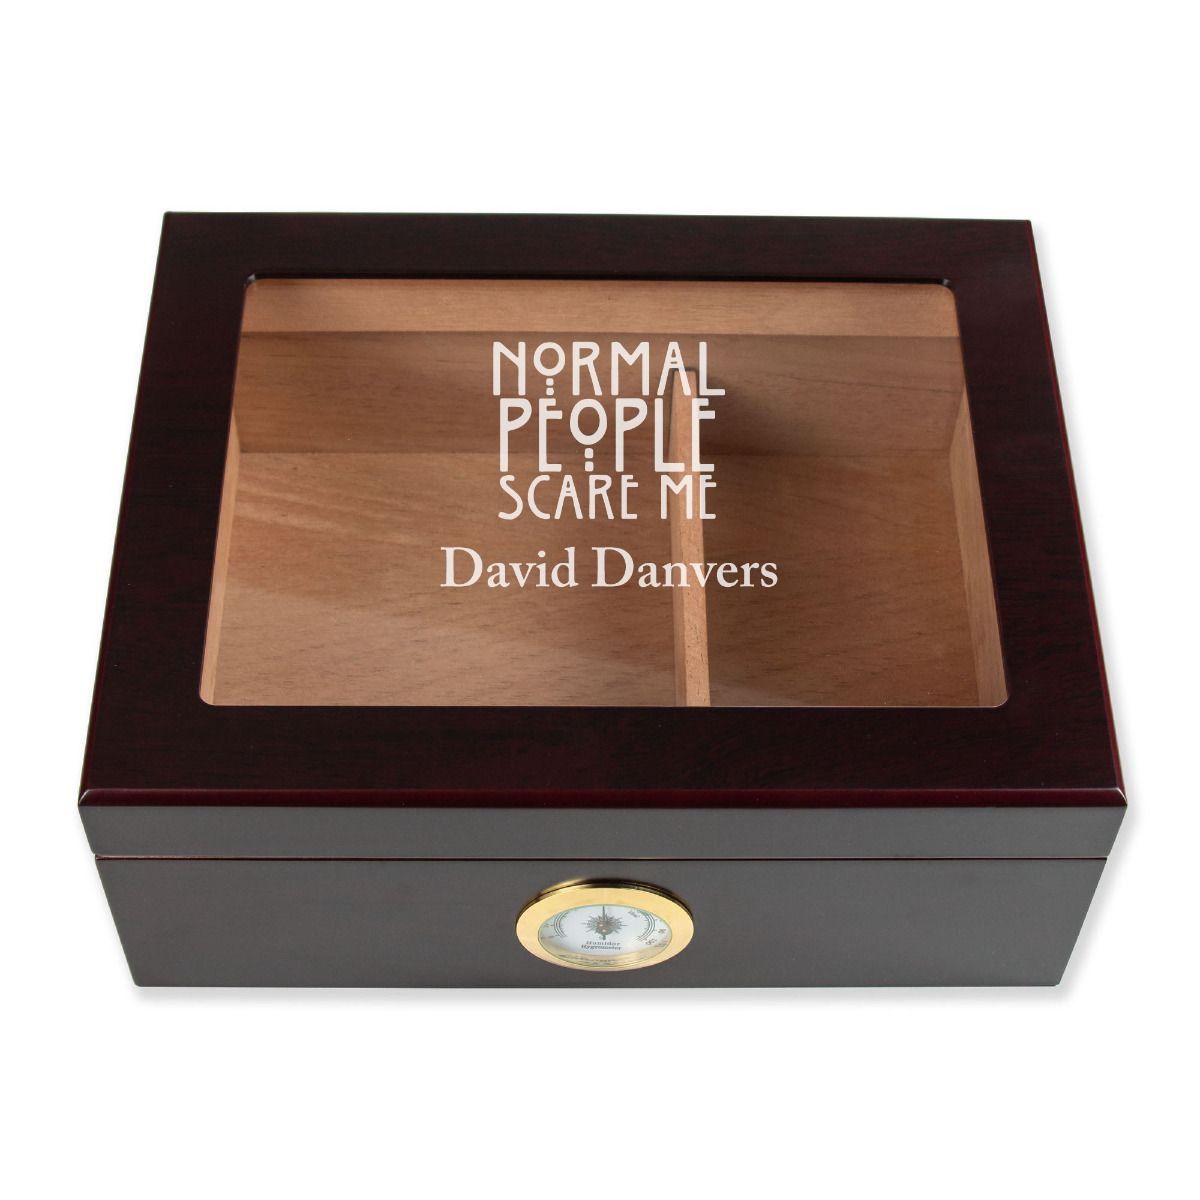 Personalized Cigar Humidor - Engraved Normal People Scare Design - Man Cave Gift Ideas - Gifts For Him - Promotional Products - Custom Gifts - Party - Corporate Gifts - Personalized Gifts